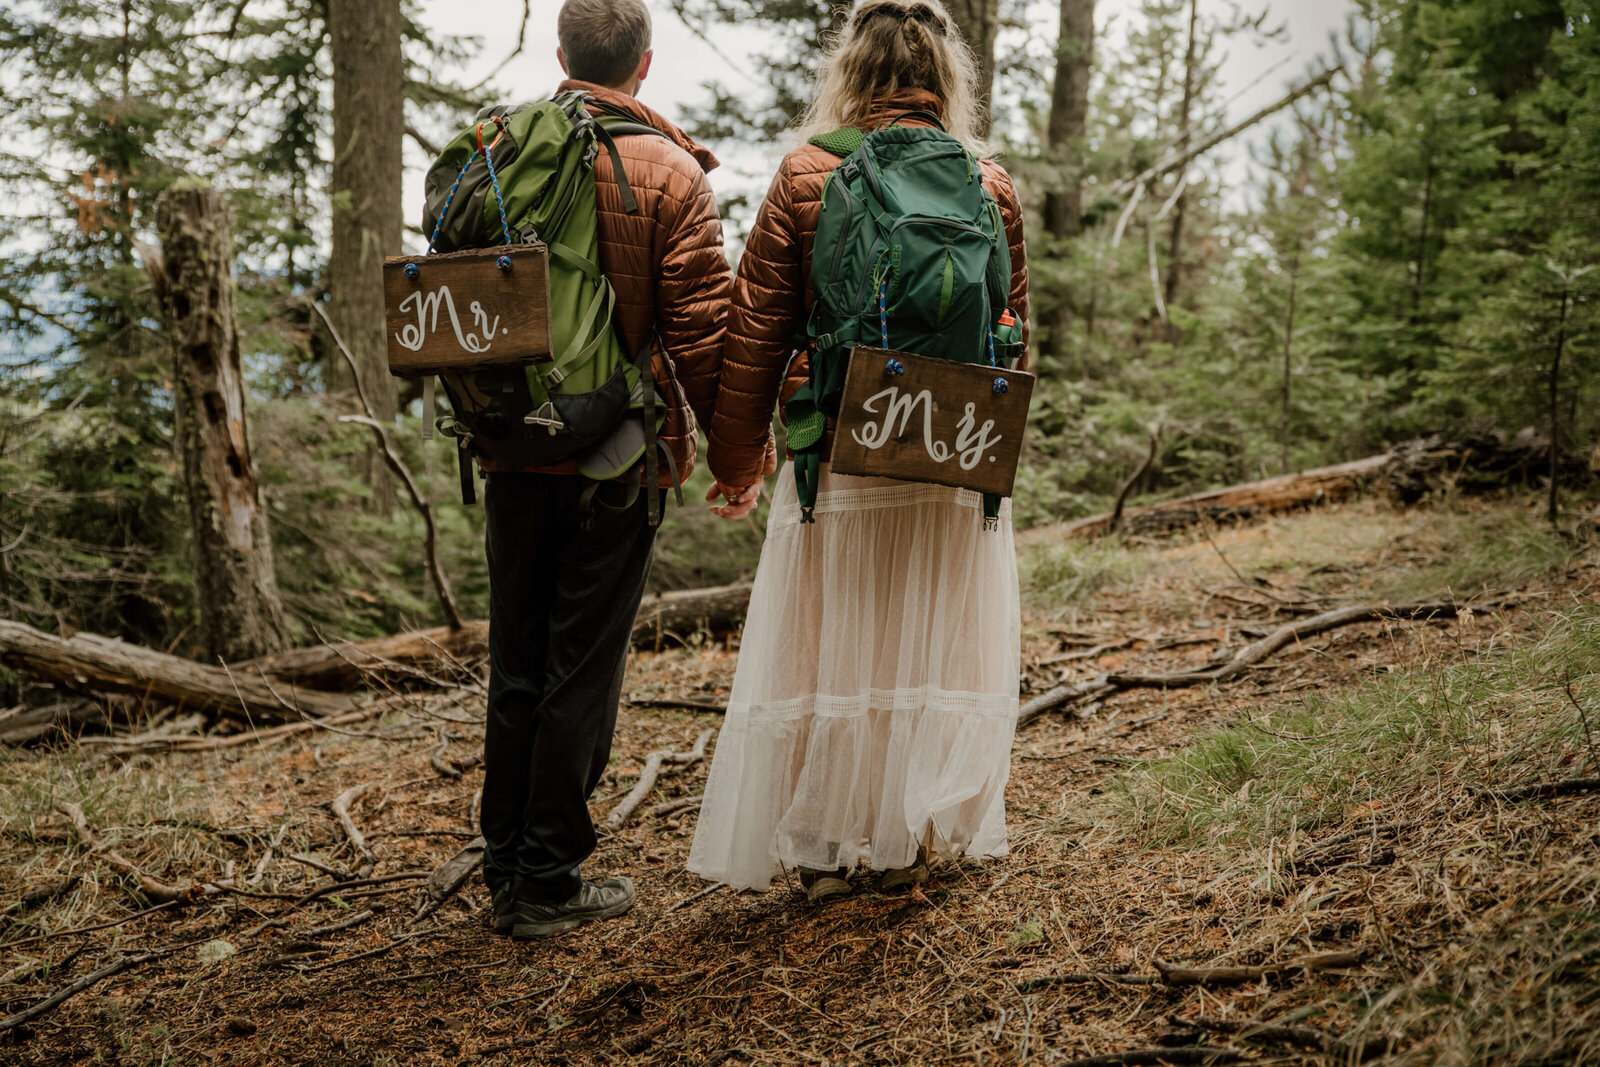 Mr. and m=Mrs. signs on hiking backpack.